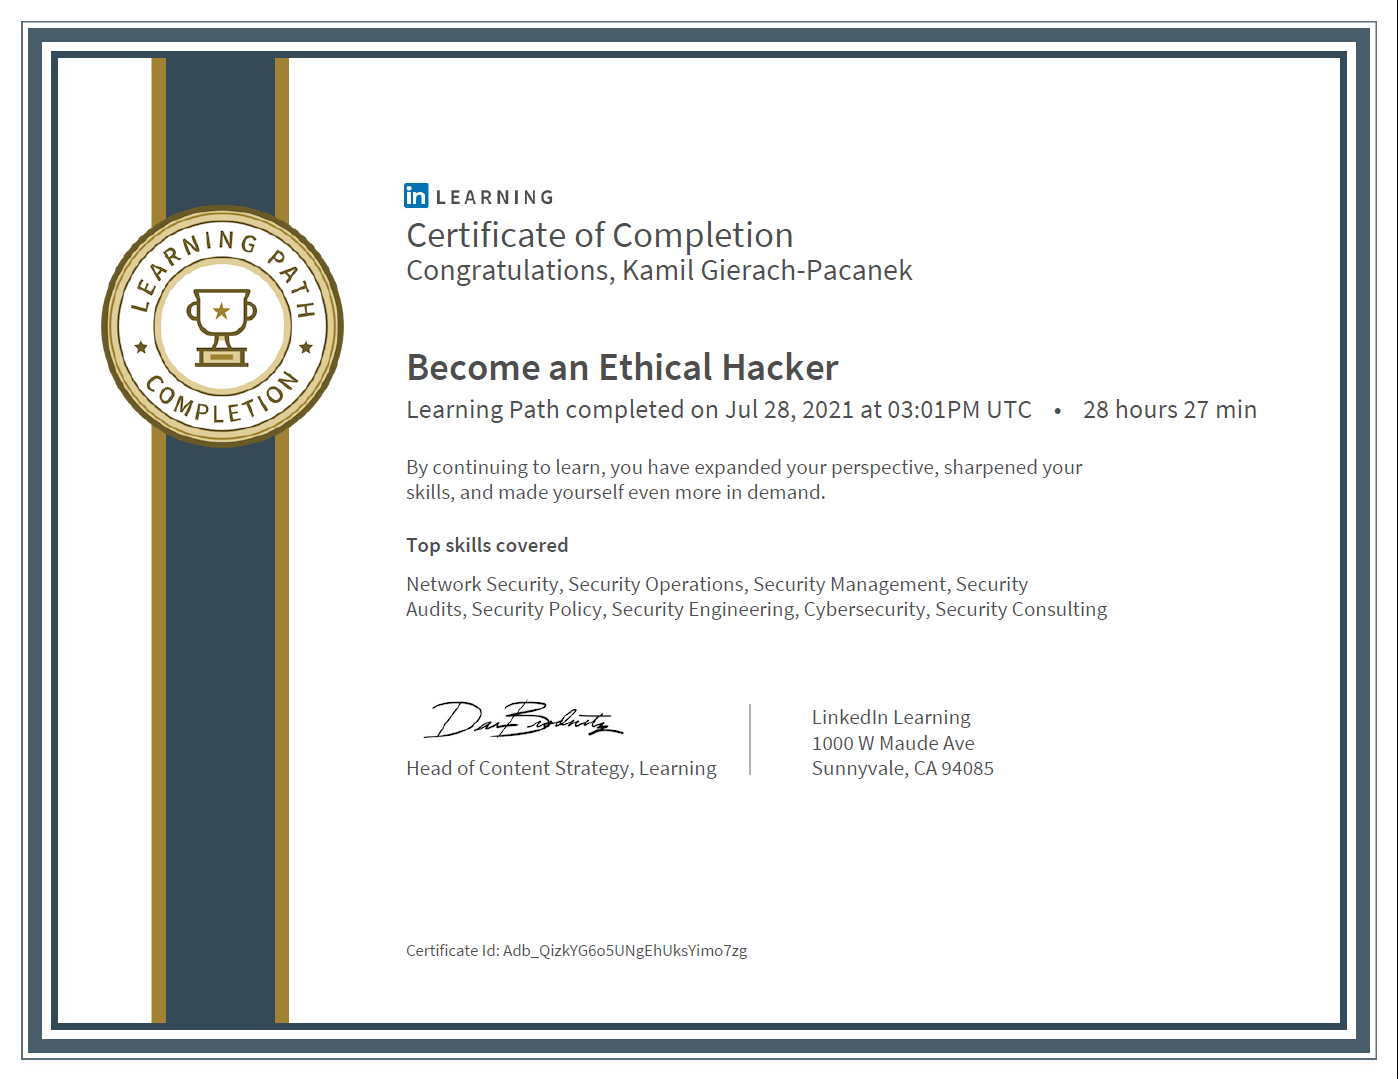 CertificateOfCompletion_Become an Ethical Hacker.png